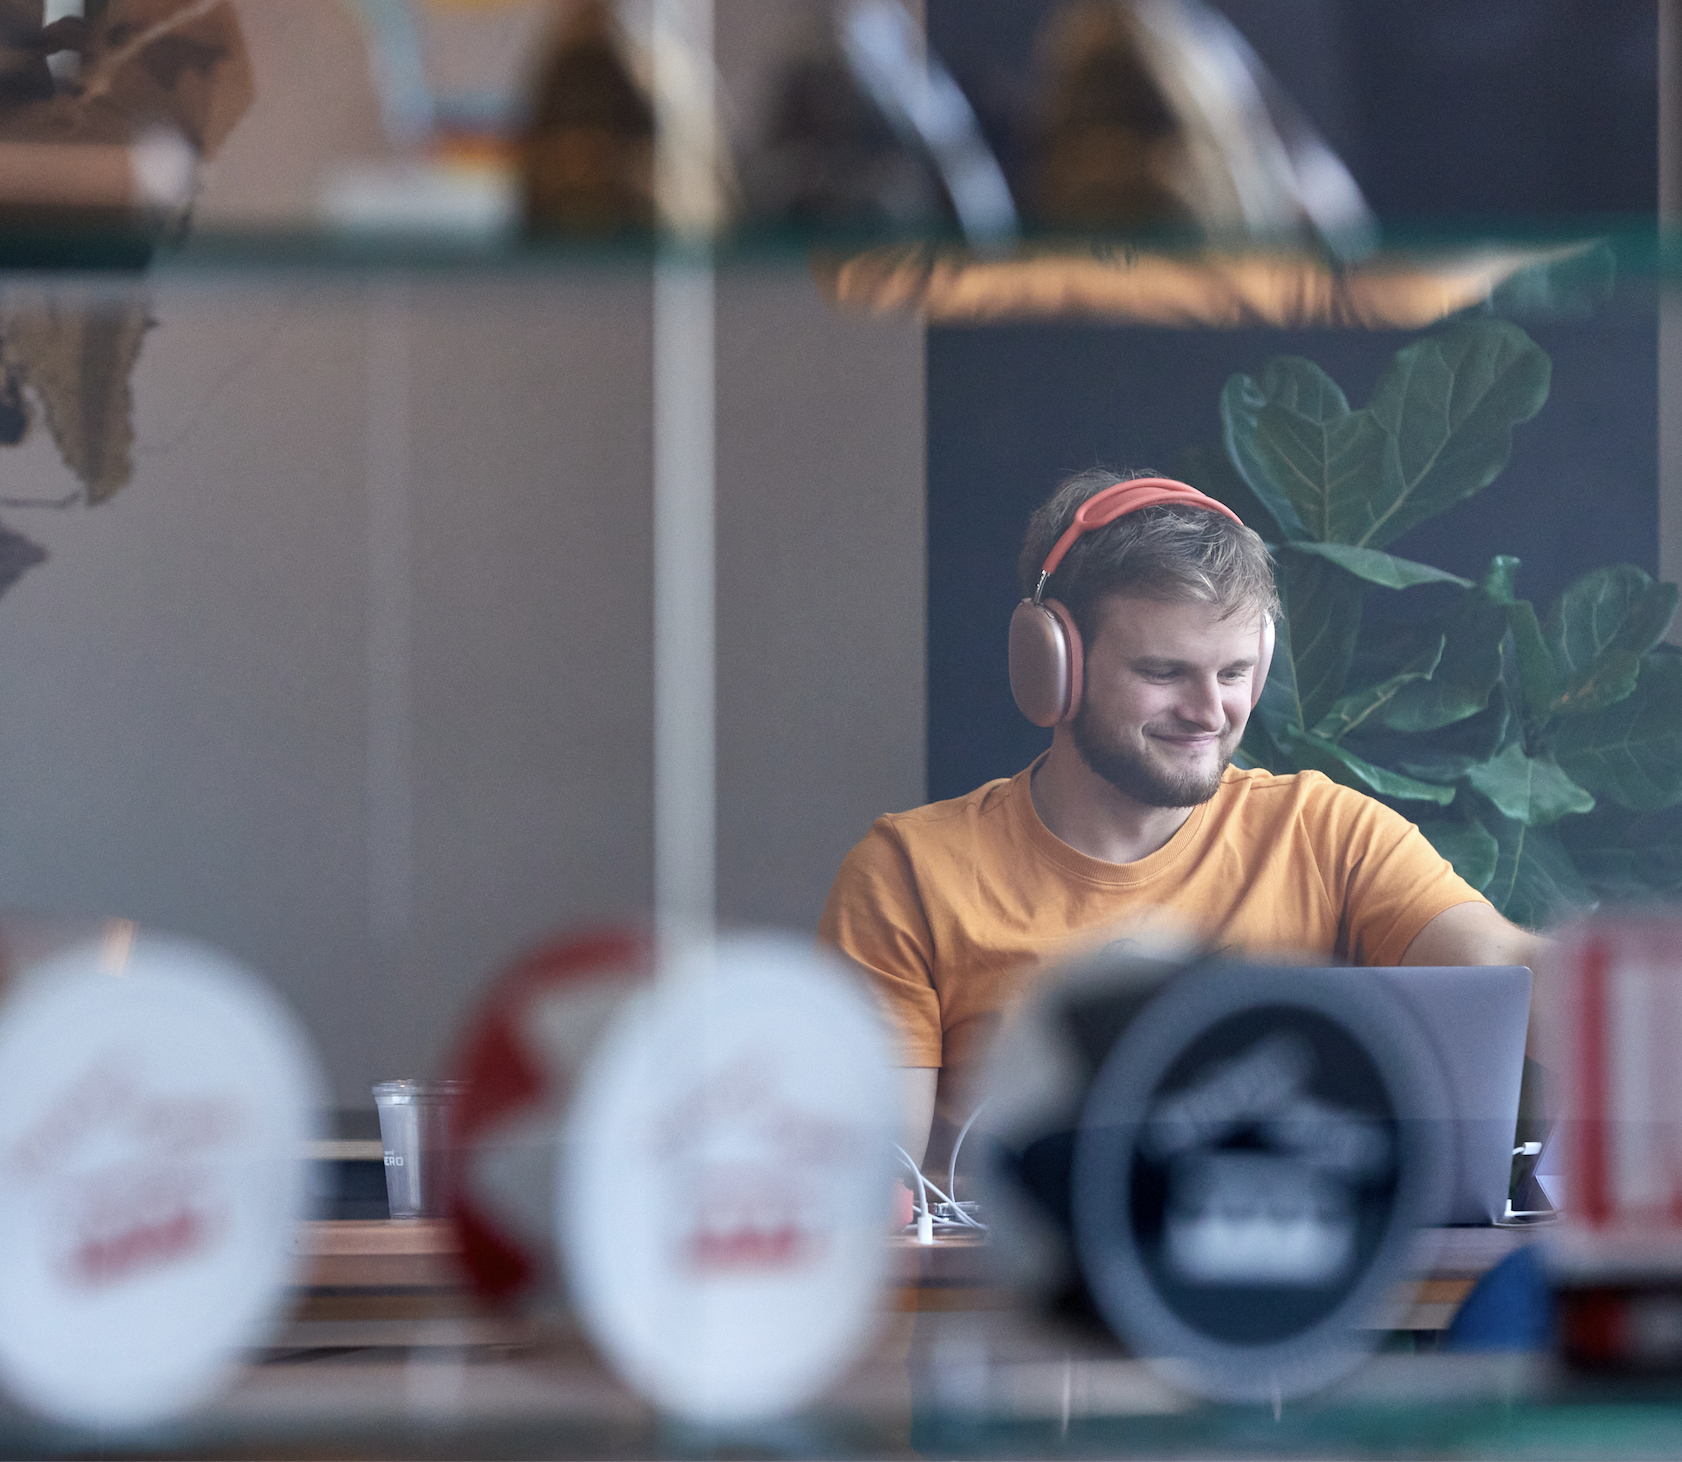 A photo of a man wearing bright yellow headphones, smiling, working on his lap top. An out-of-focus digital design awards are on the shelf in front of him.